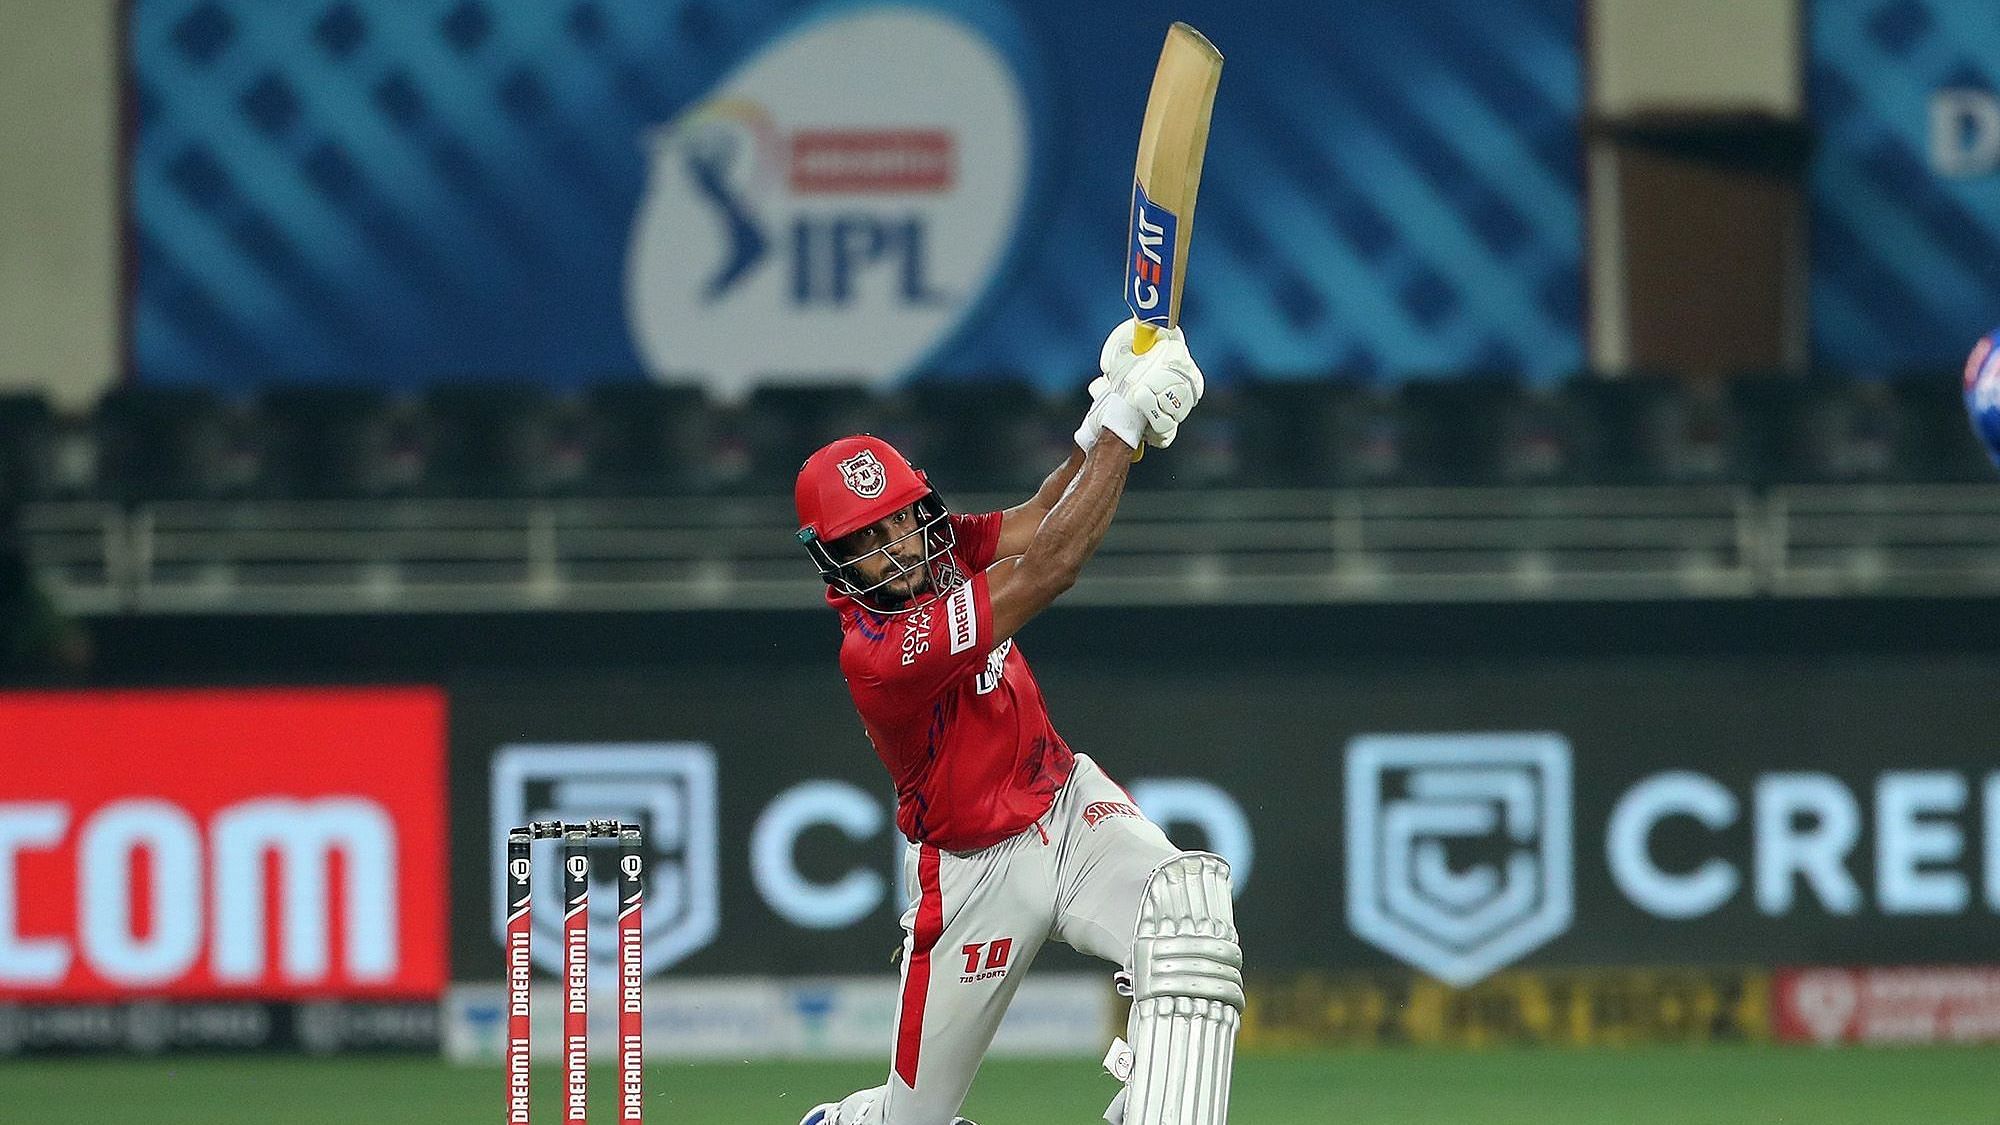 Mayank Agarwal after playing for 19.4 overs in the Kings XI Punjab’s innings played a full-toss into the hands of the fielder at deep point.